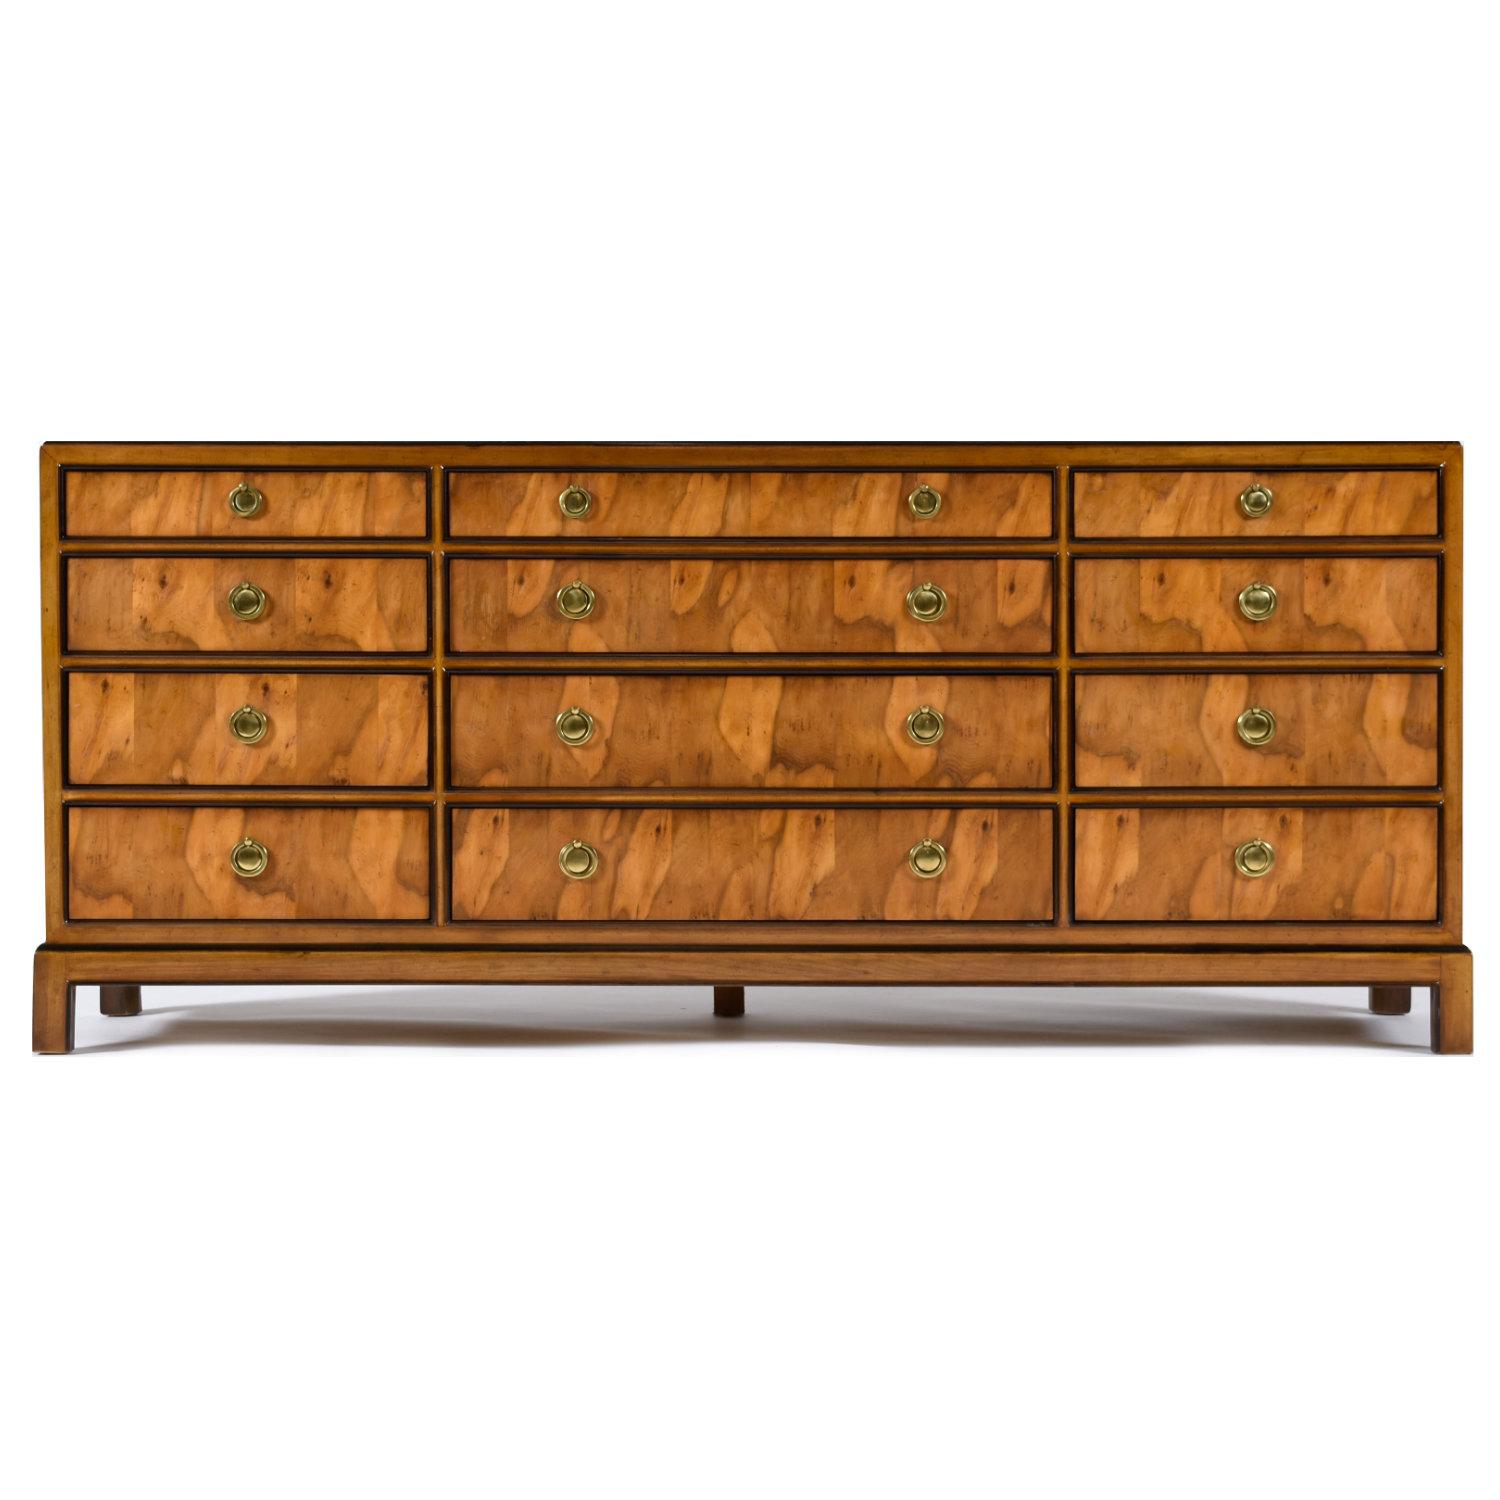 Beautifully figured burl wood Drexel Avenues campaign dresser. Offered by Drexel from their “Avenues” line of interior furnishings. The dresser is as functional as it is beautiful. There’s is no want for storage with this ample twelve drawer